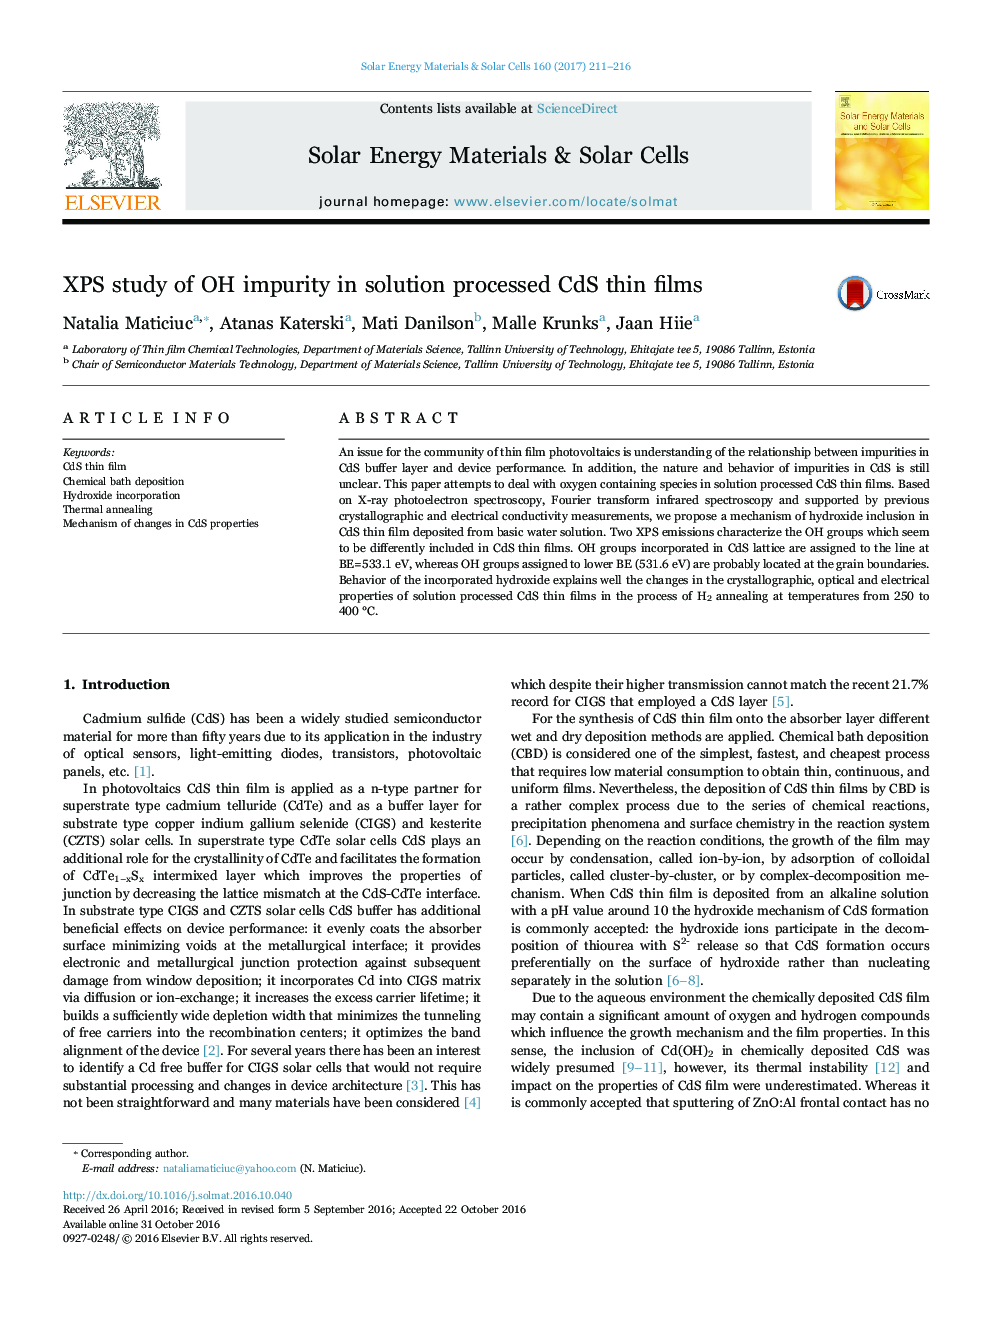 XPS study of OH impurity in solution processed CdS thin films